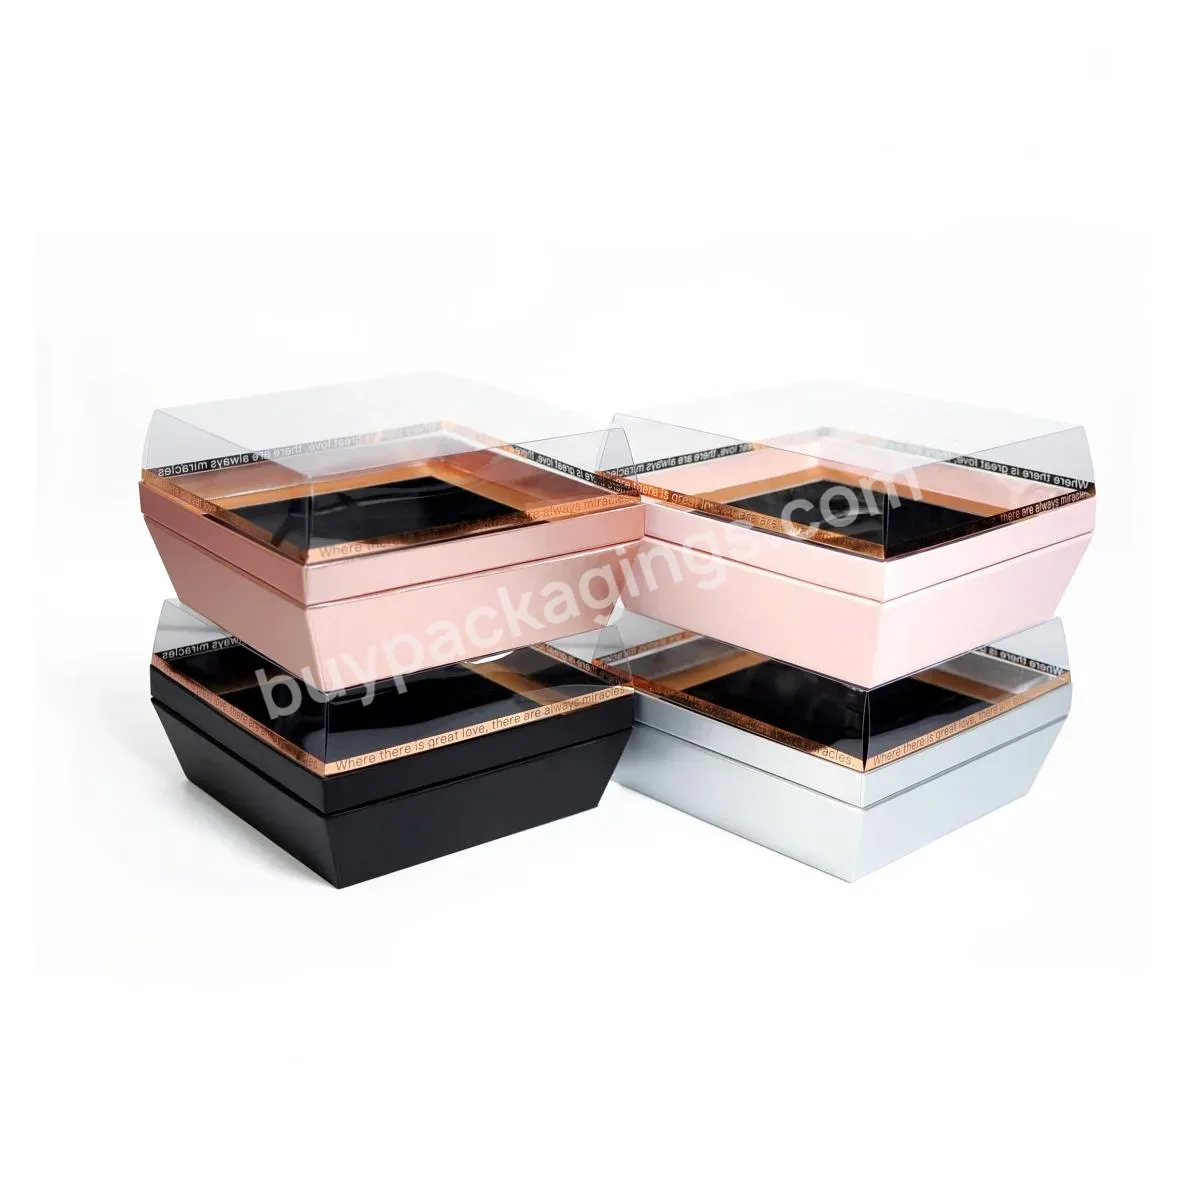 Luxury Square Flower Gift Box Acrylic Box With Clear Acrylic Cover For Valentine's Day - Buy Square Flower Gift Box,Box With Clear Acrylic Cover,Flower Gift Box For Valentine's Day.